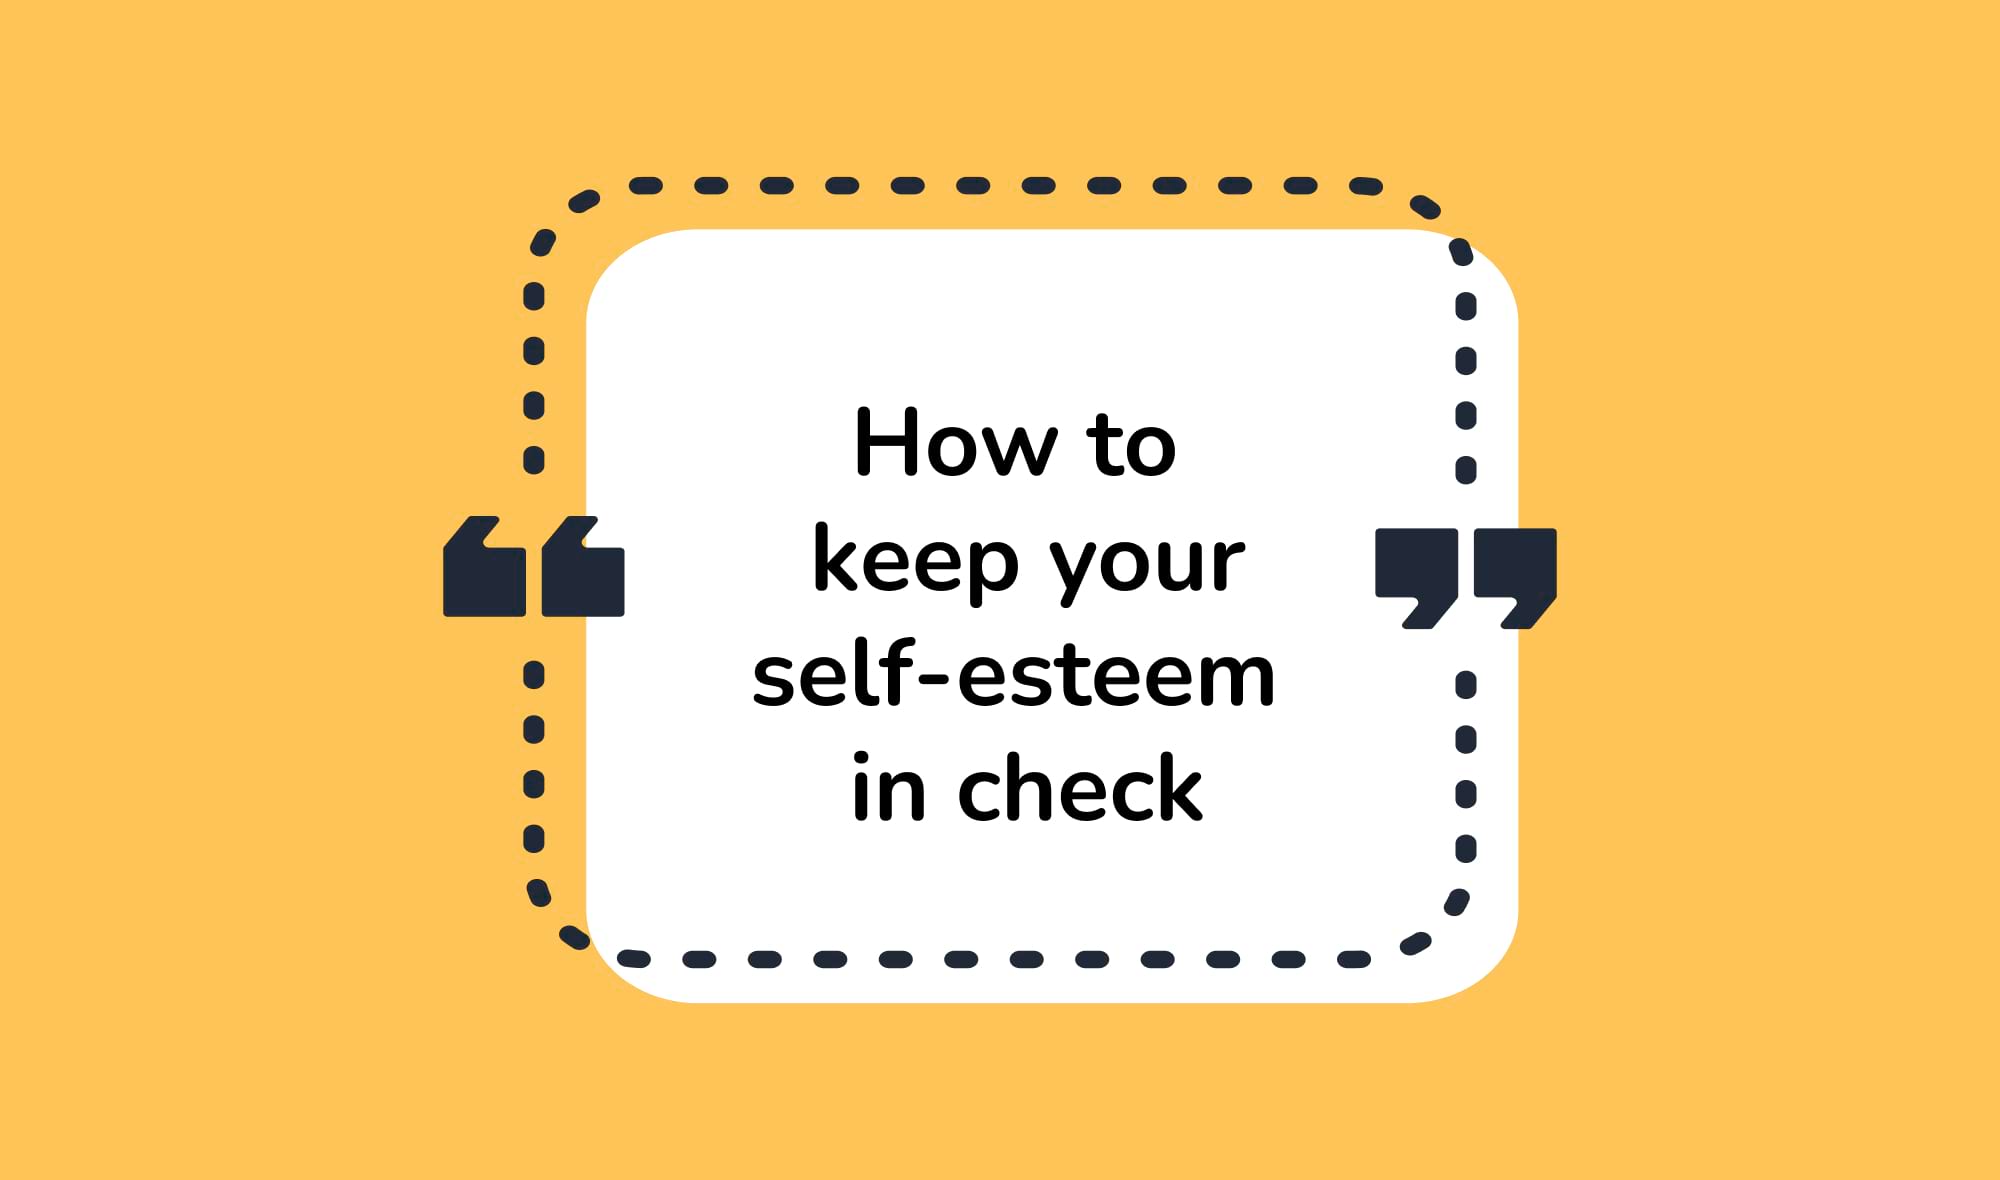 How to keep your self-esteem in check